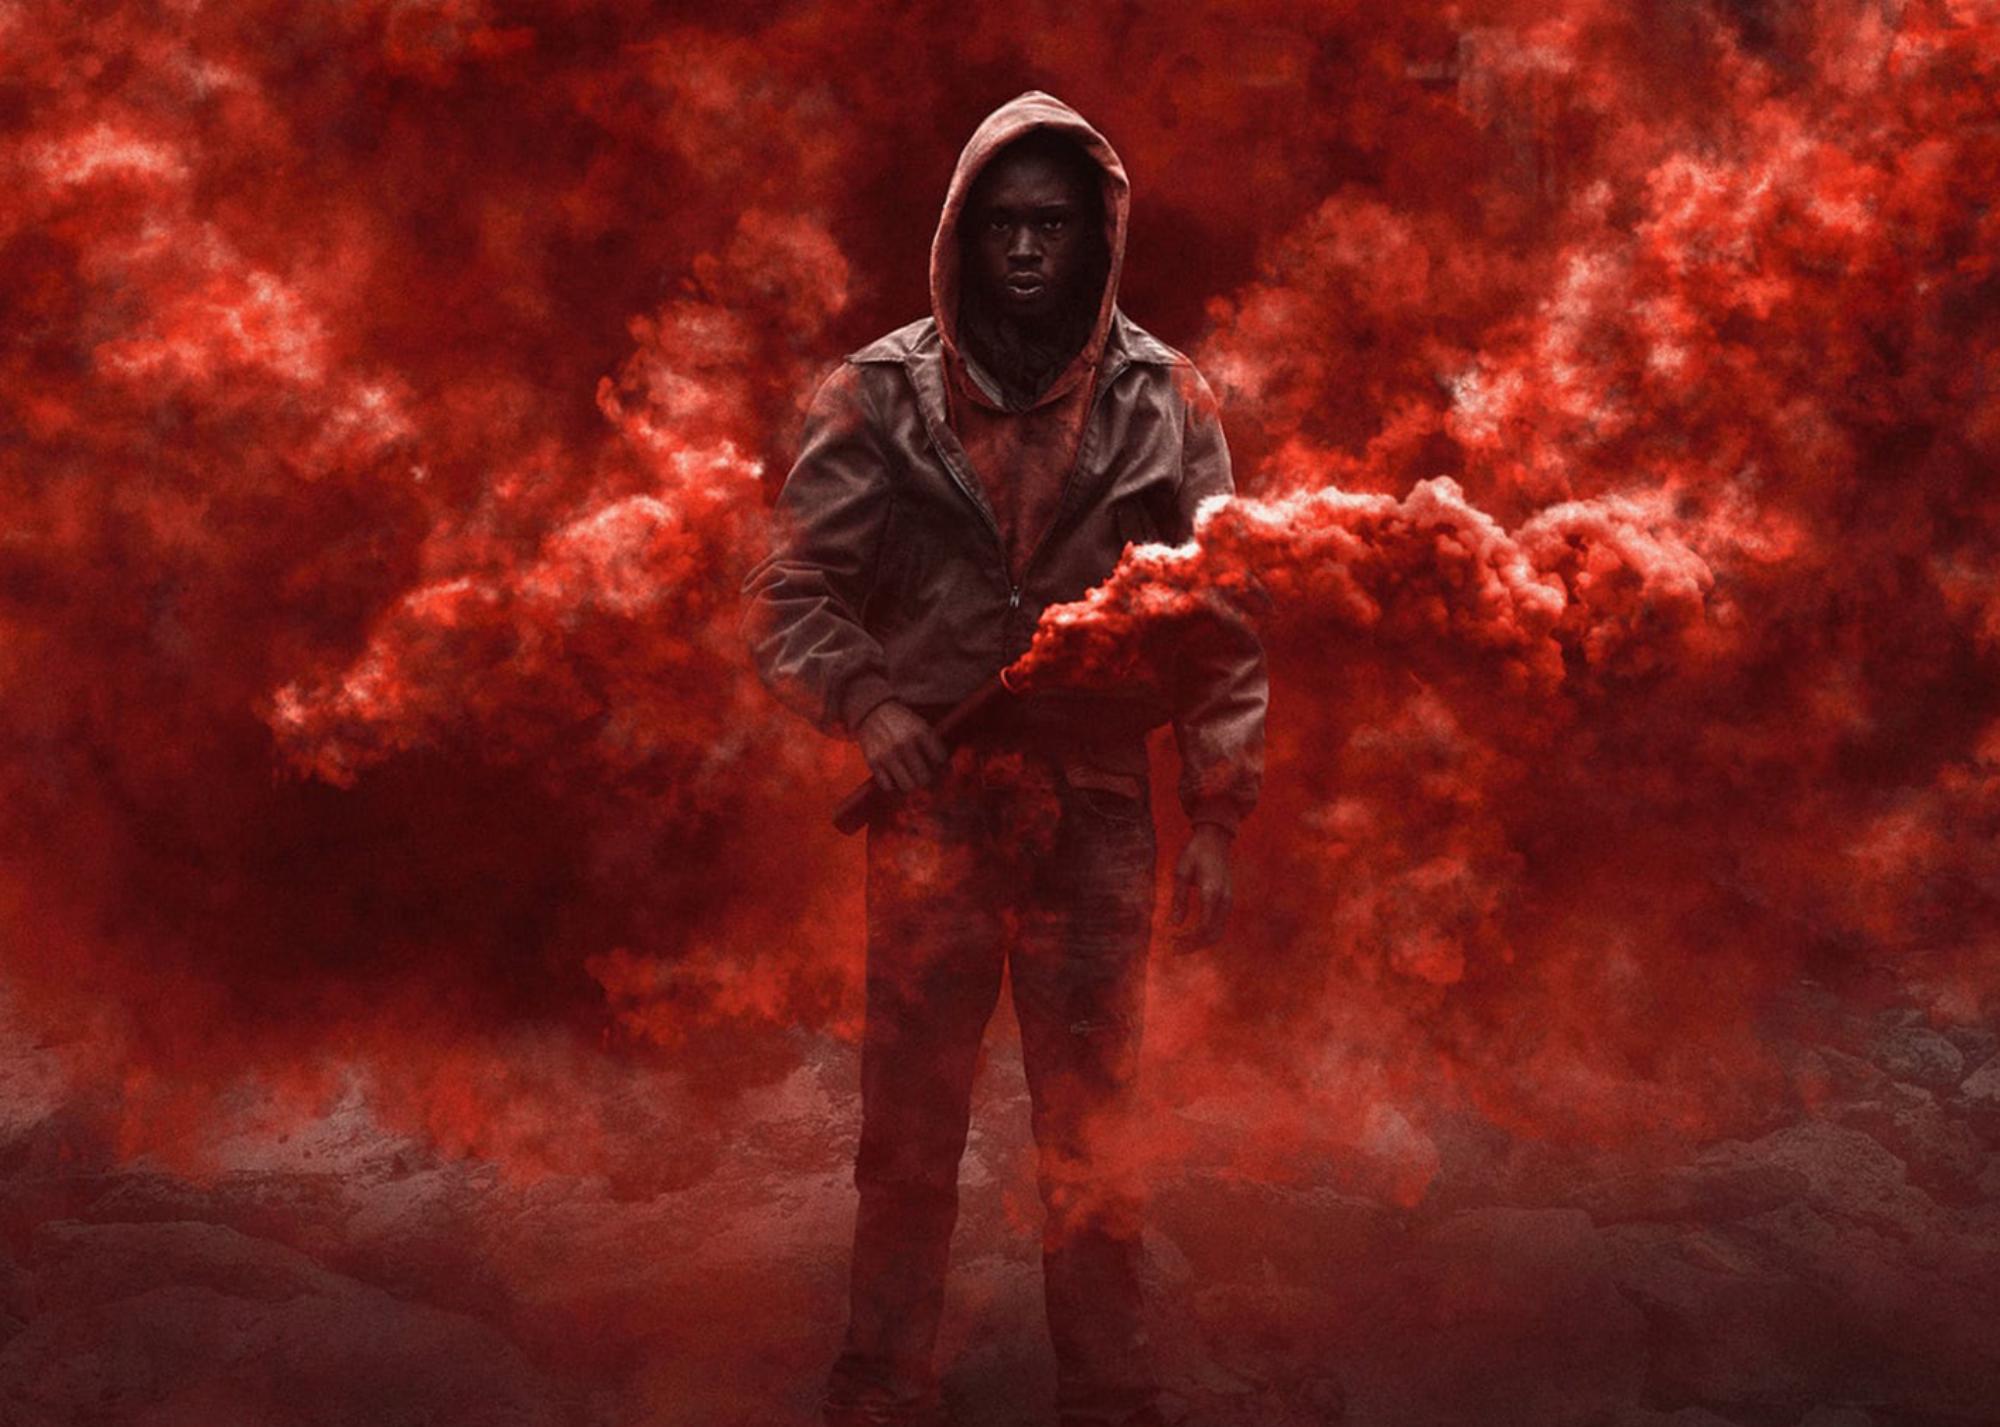 Captive State Movie Tickets & Showtimes Near You